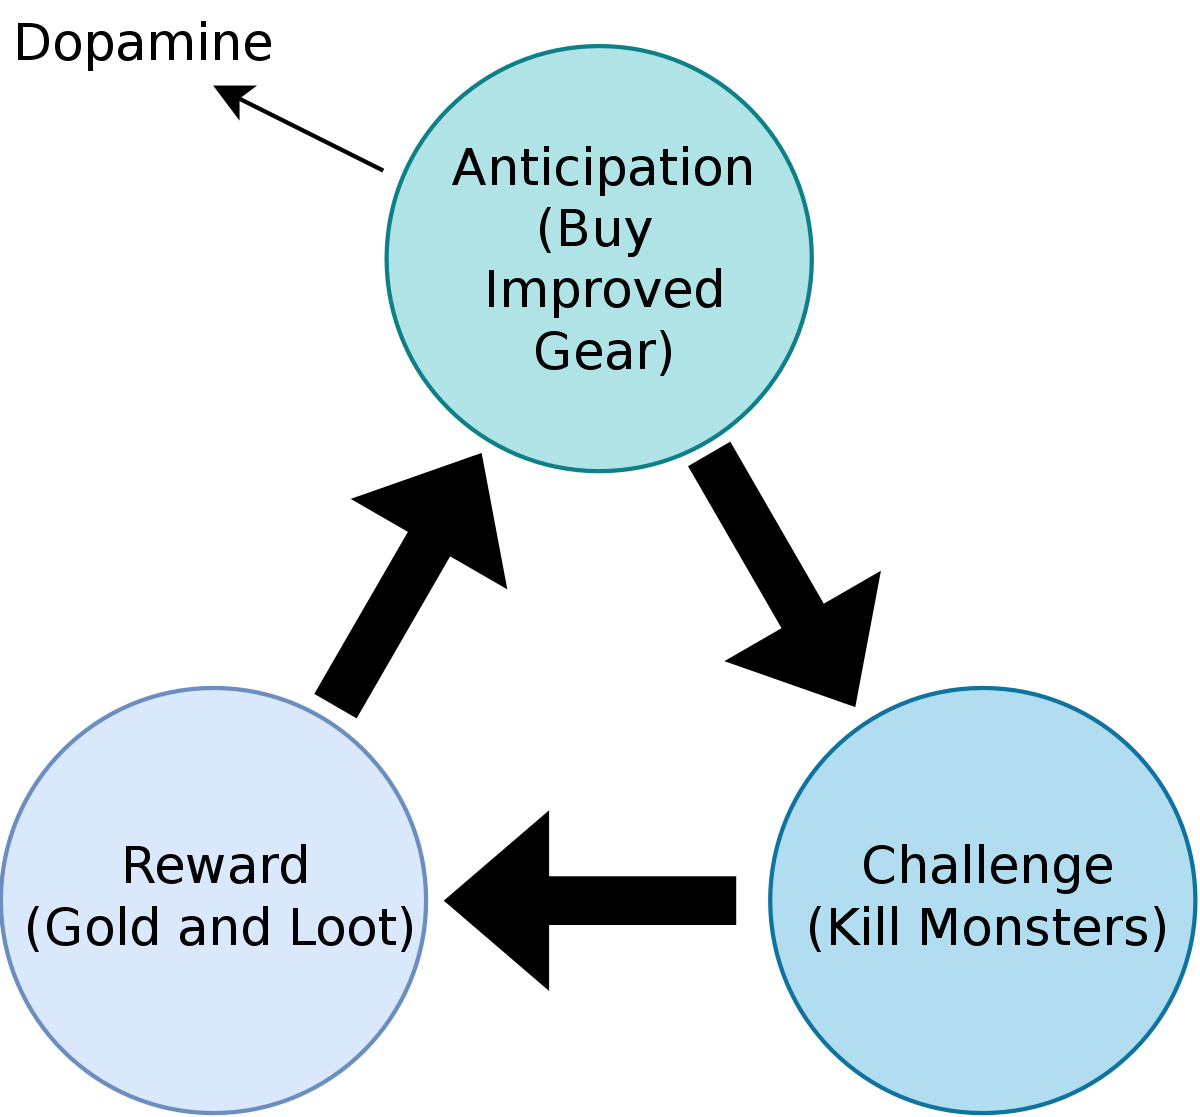 A circle with anticipation, challenge and reward as circles. This creates dopamine